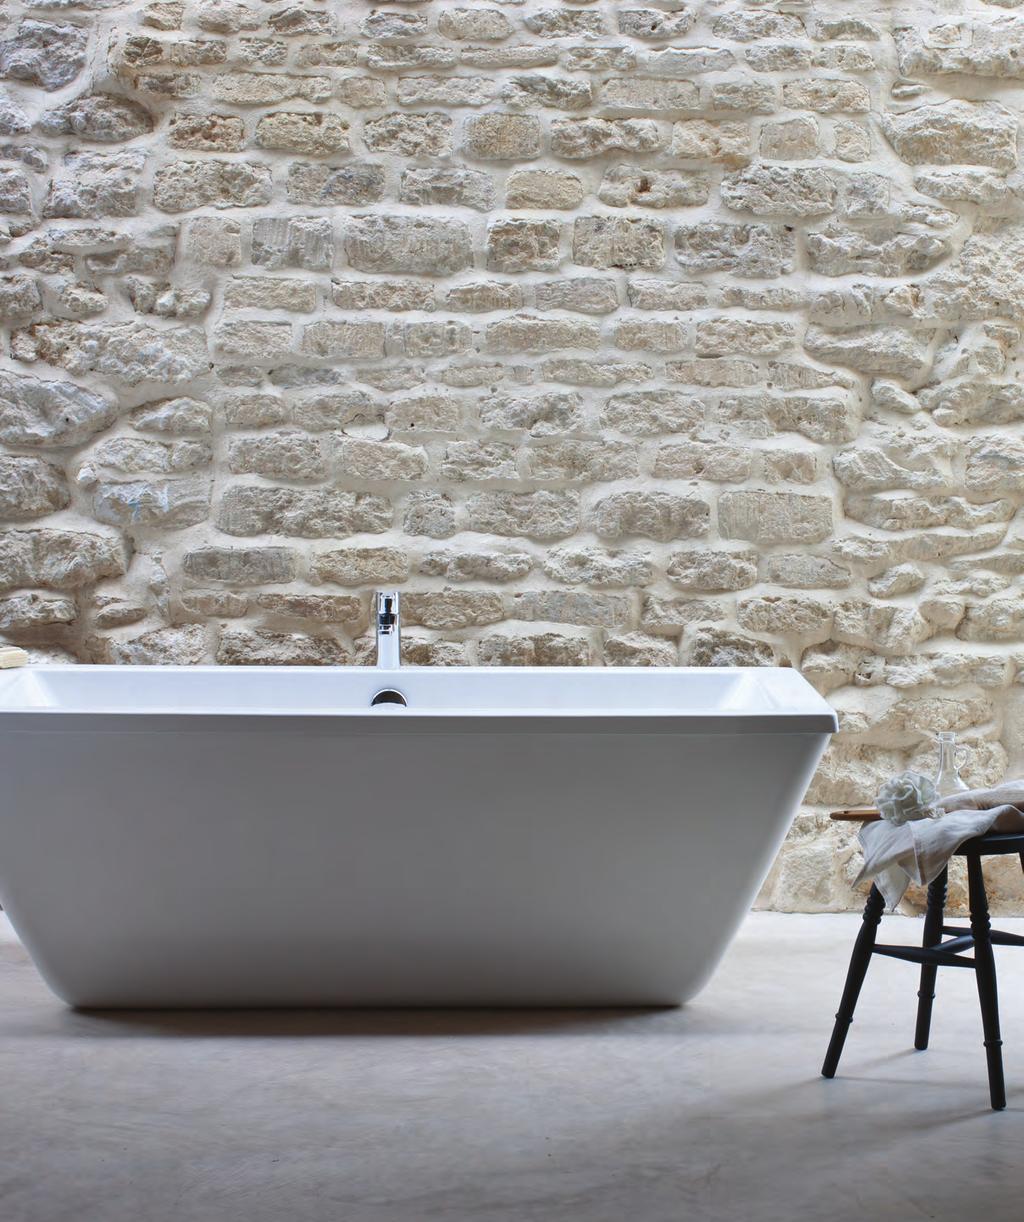 FREEFORTIS A slanted ergonomically shaped two piece bath, which looks great paired with the Cube ceramic range. For an ultra minimalistic look, opt with a single lever bath filler.